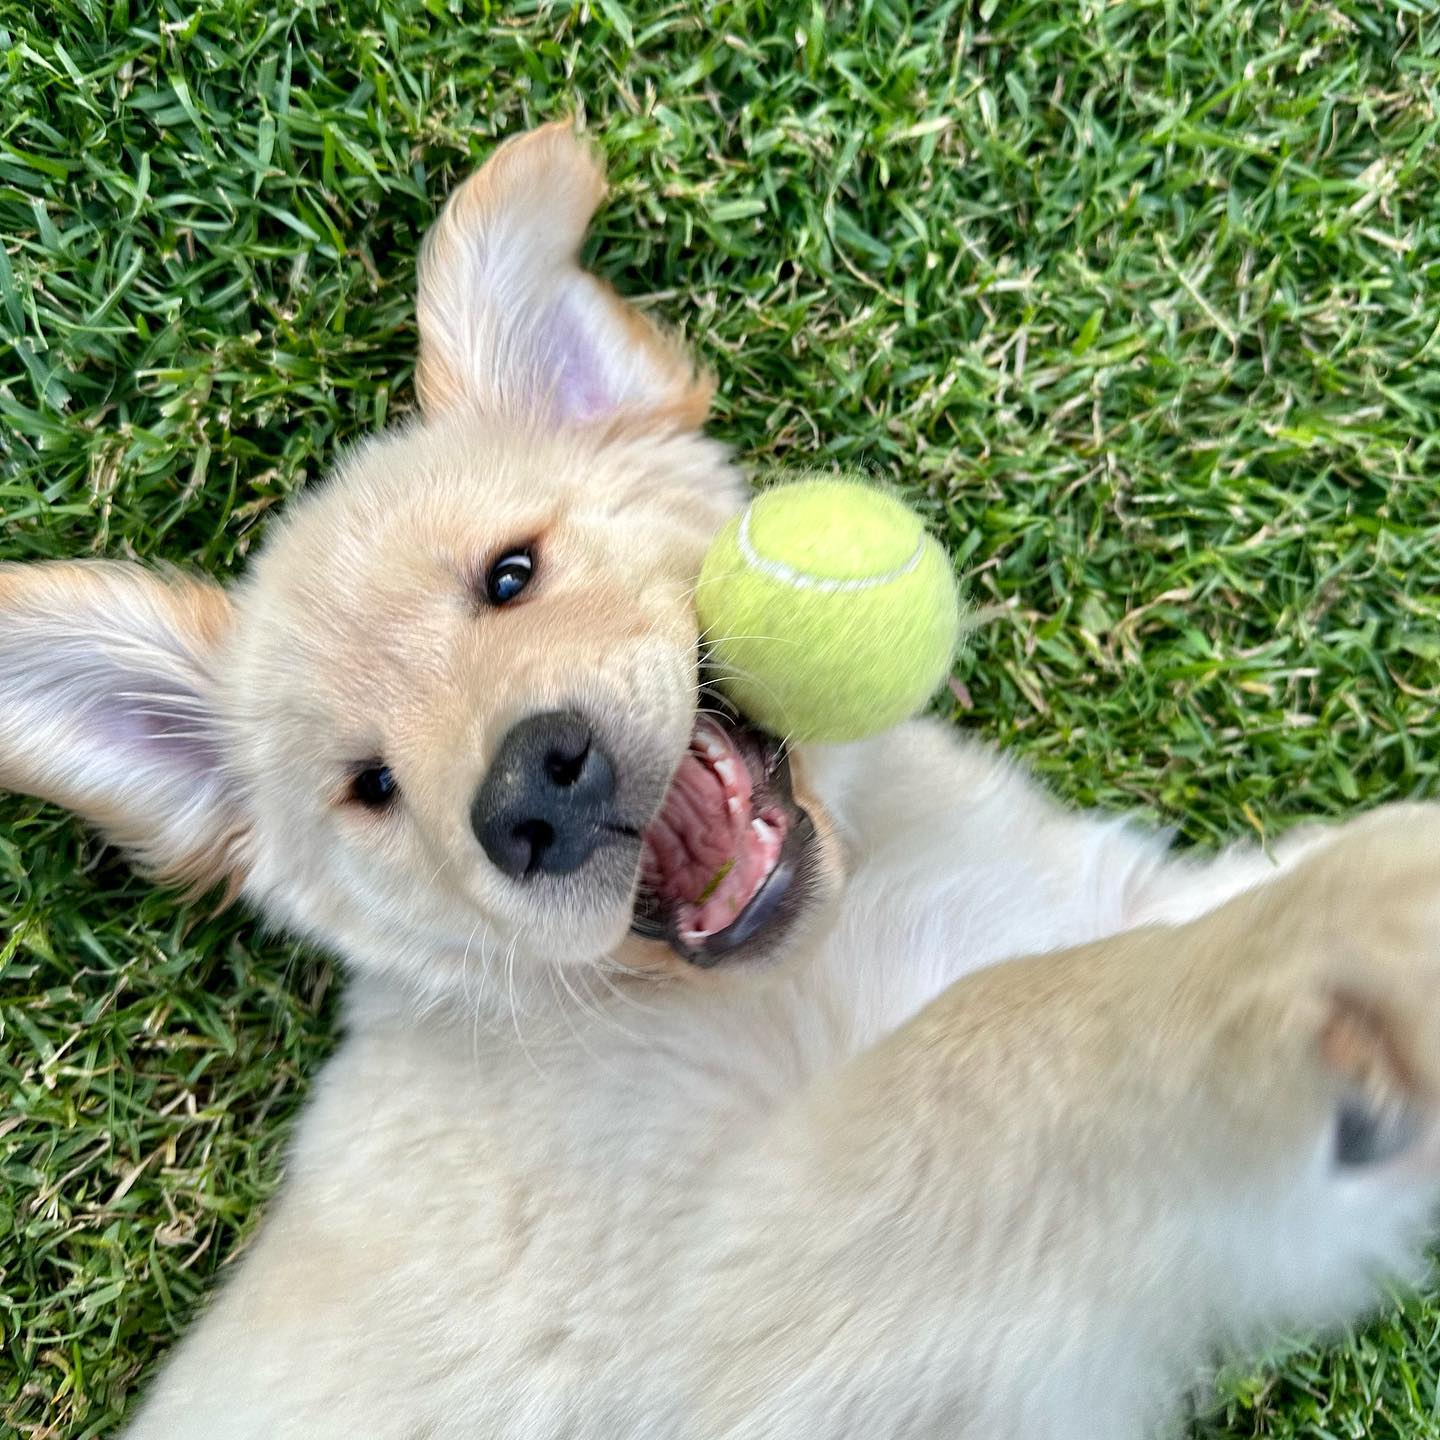 Golden retriever puppy lying in the grass, playfully looking up at the camera with a tenis ball in its mouth.